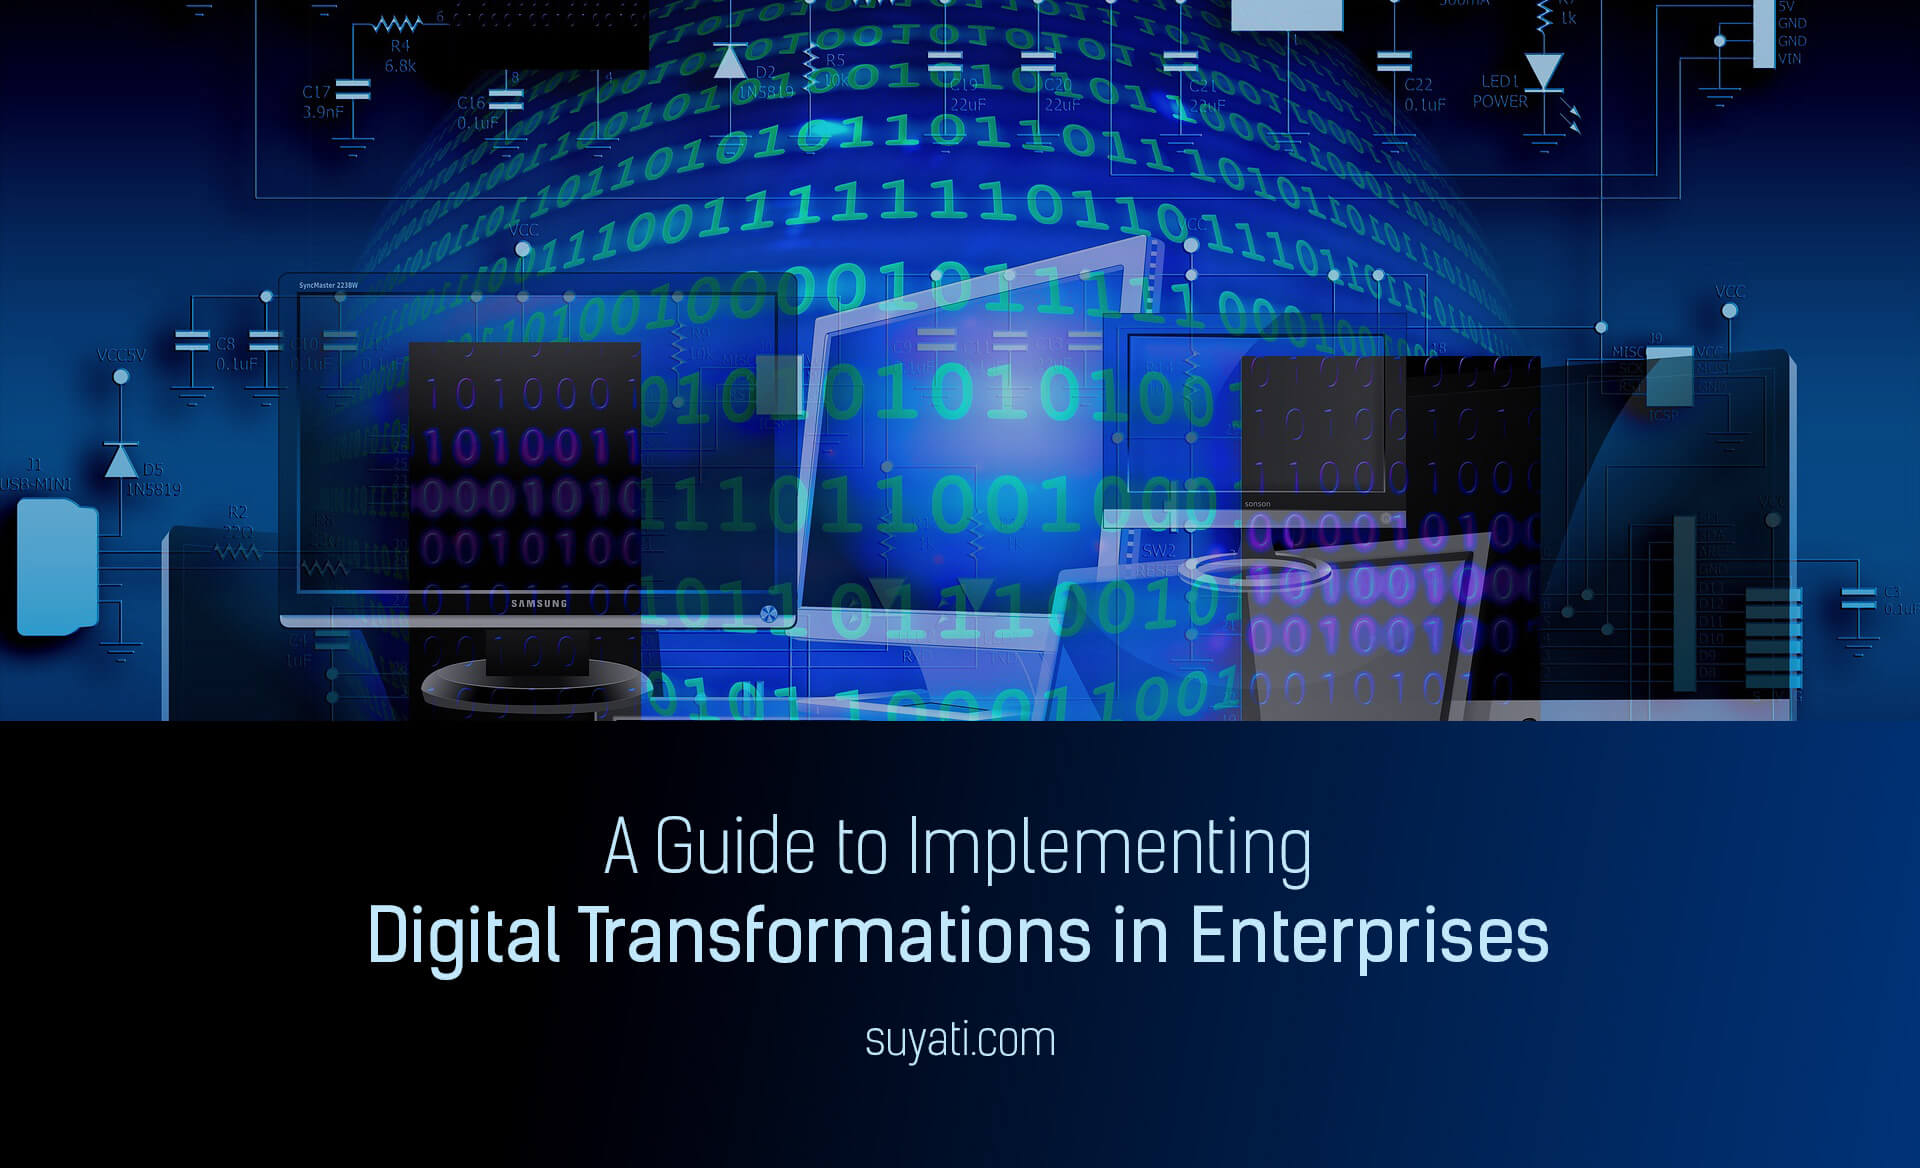 A Guide to Implementing Digital Transformations in Enterprises